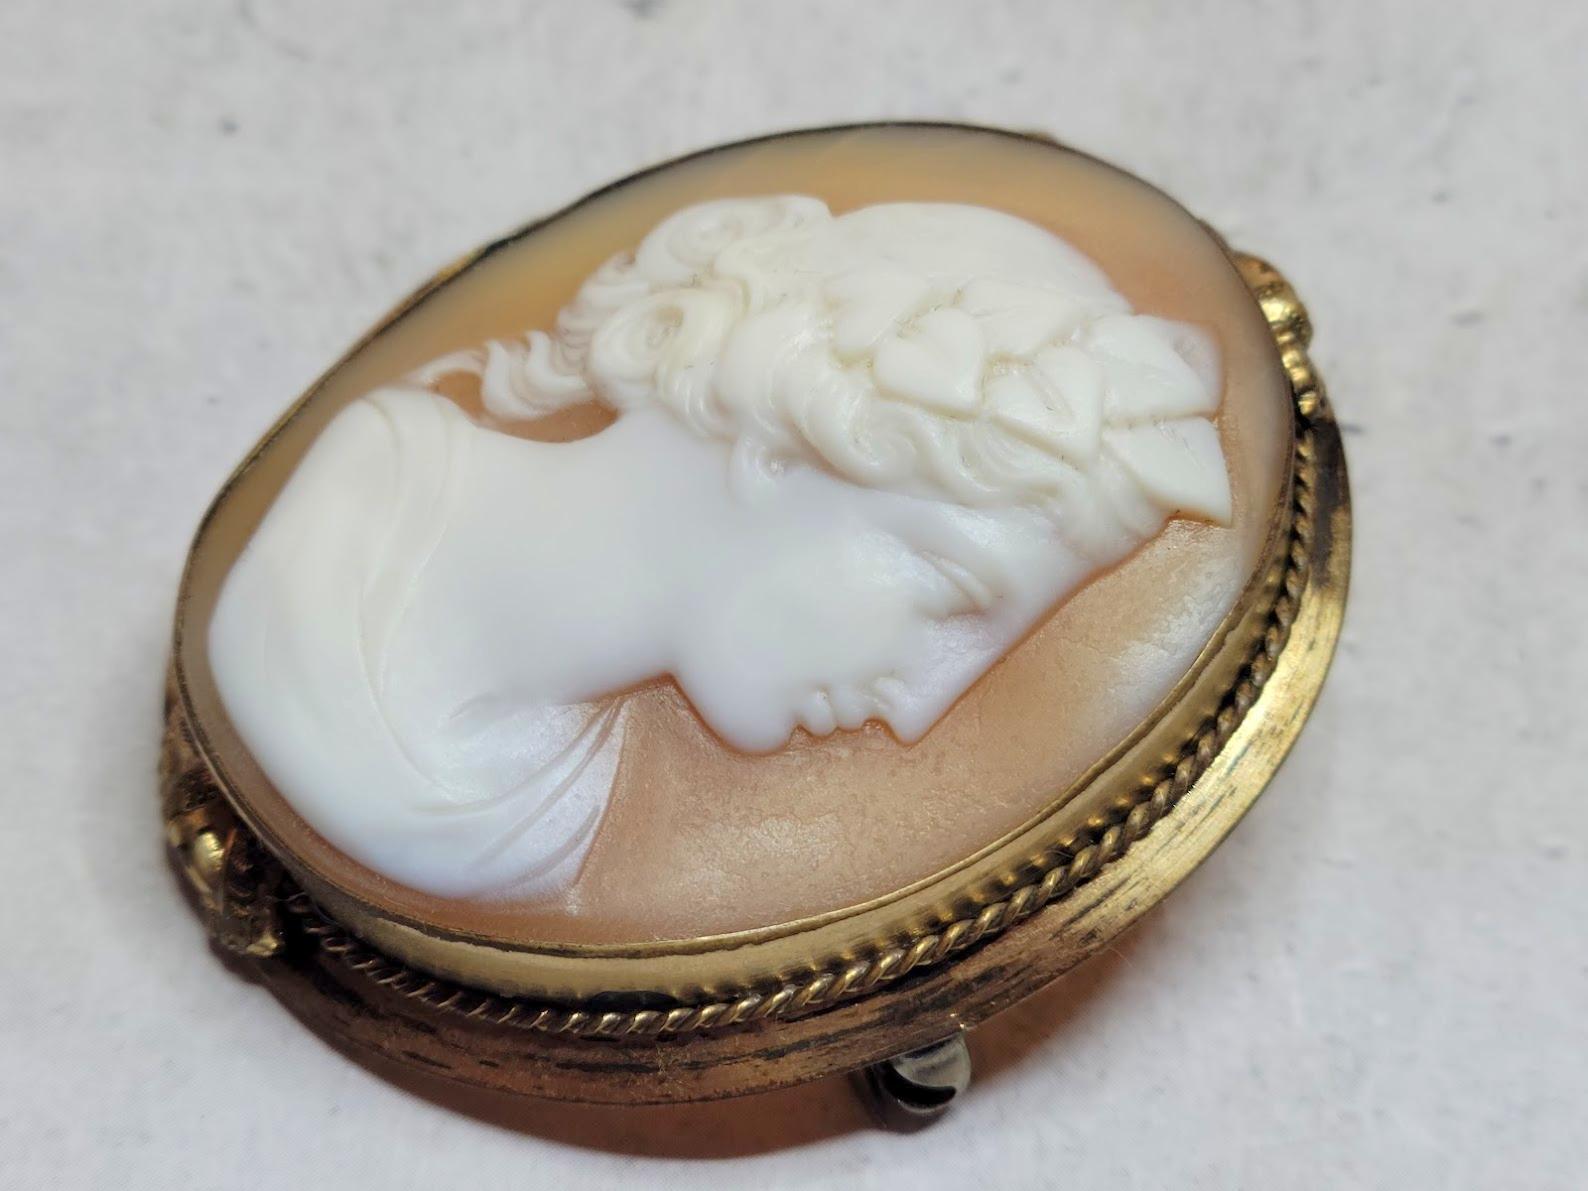 Victorian Cameo Brooch. Fabulous carved Victorian brooch made around the late 1800s. It depicts a beautiful Bacchante. The execution of the shell is amazing, and the relief helps to add details and dimension to the design. The carving is masterfully